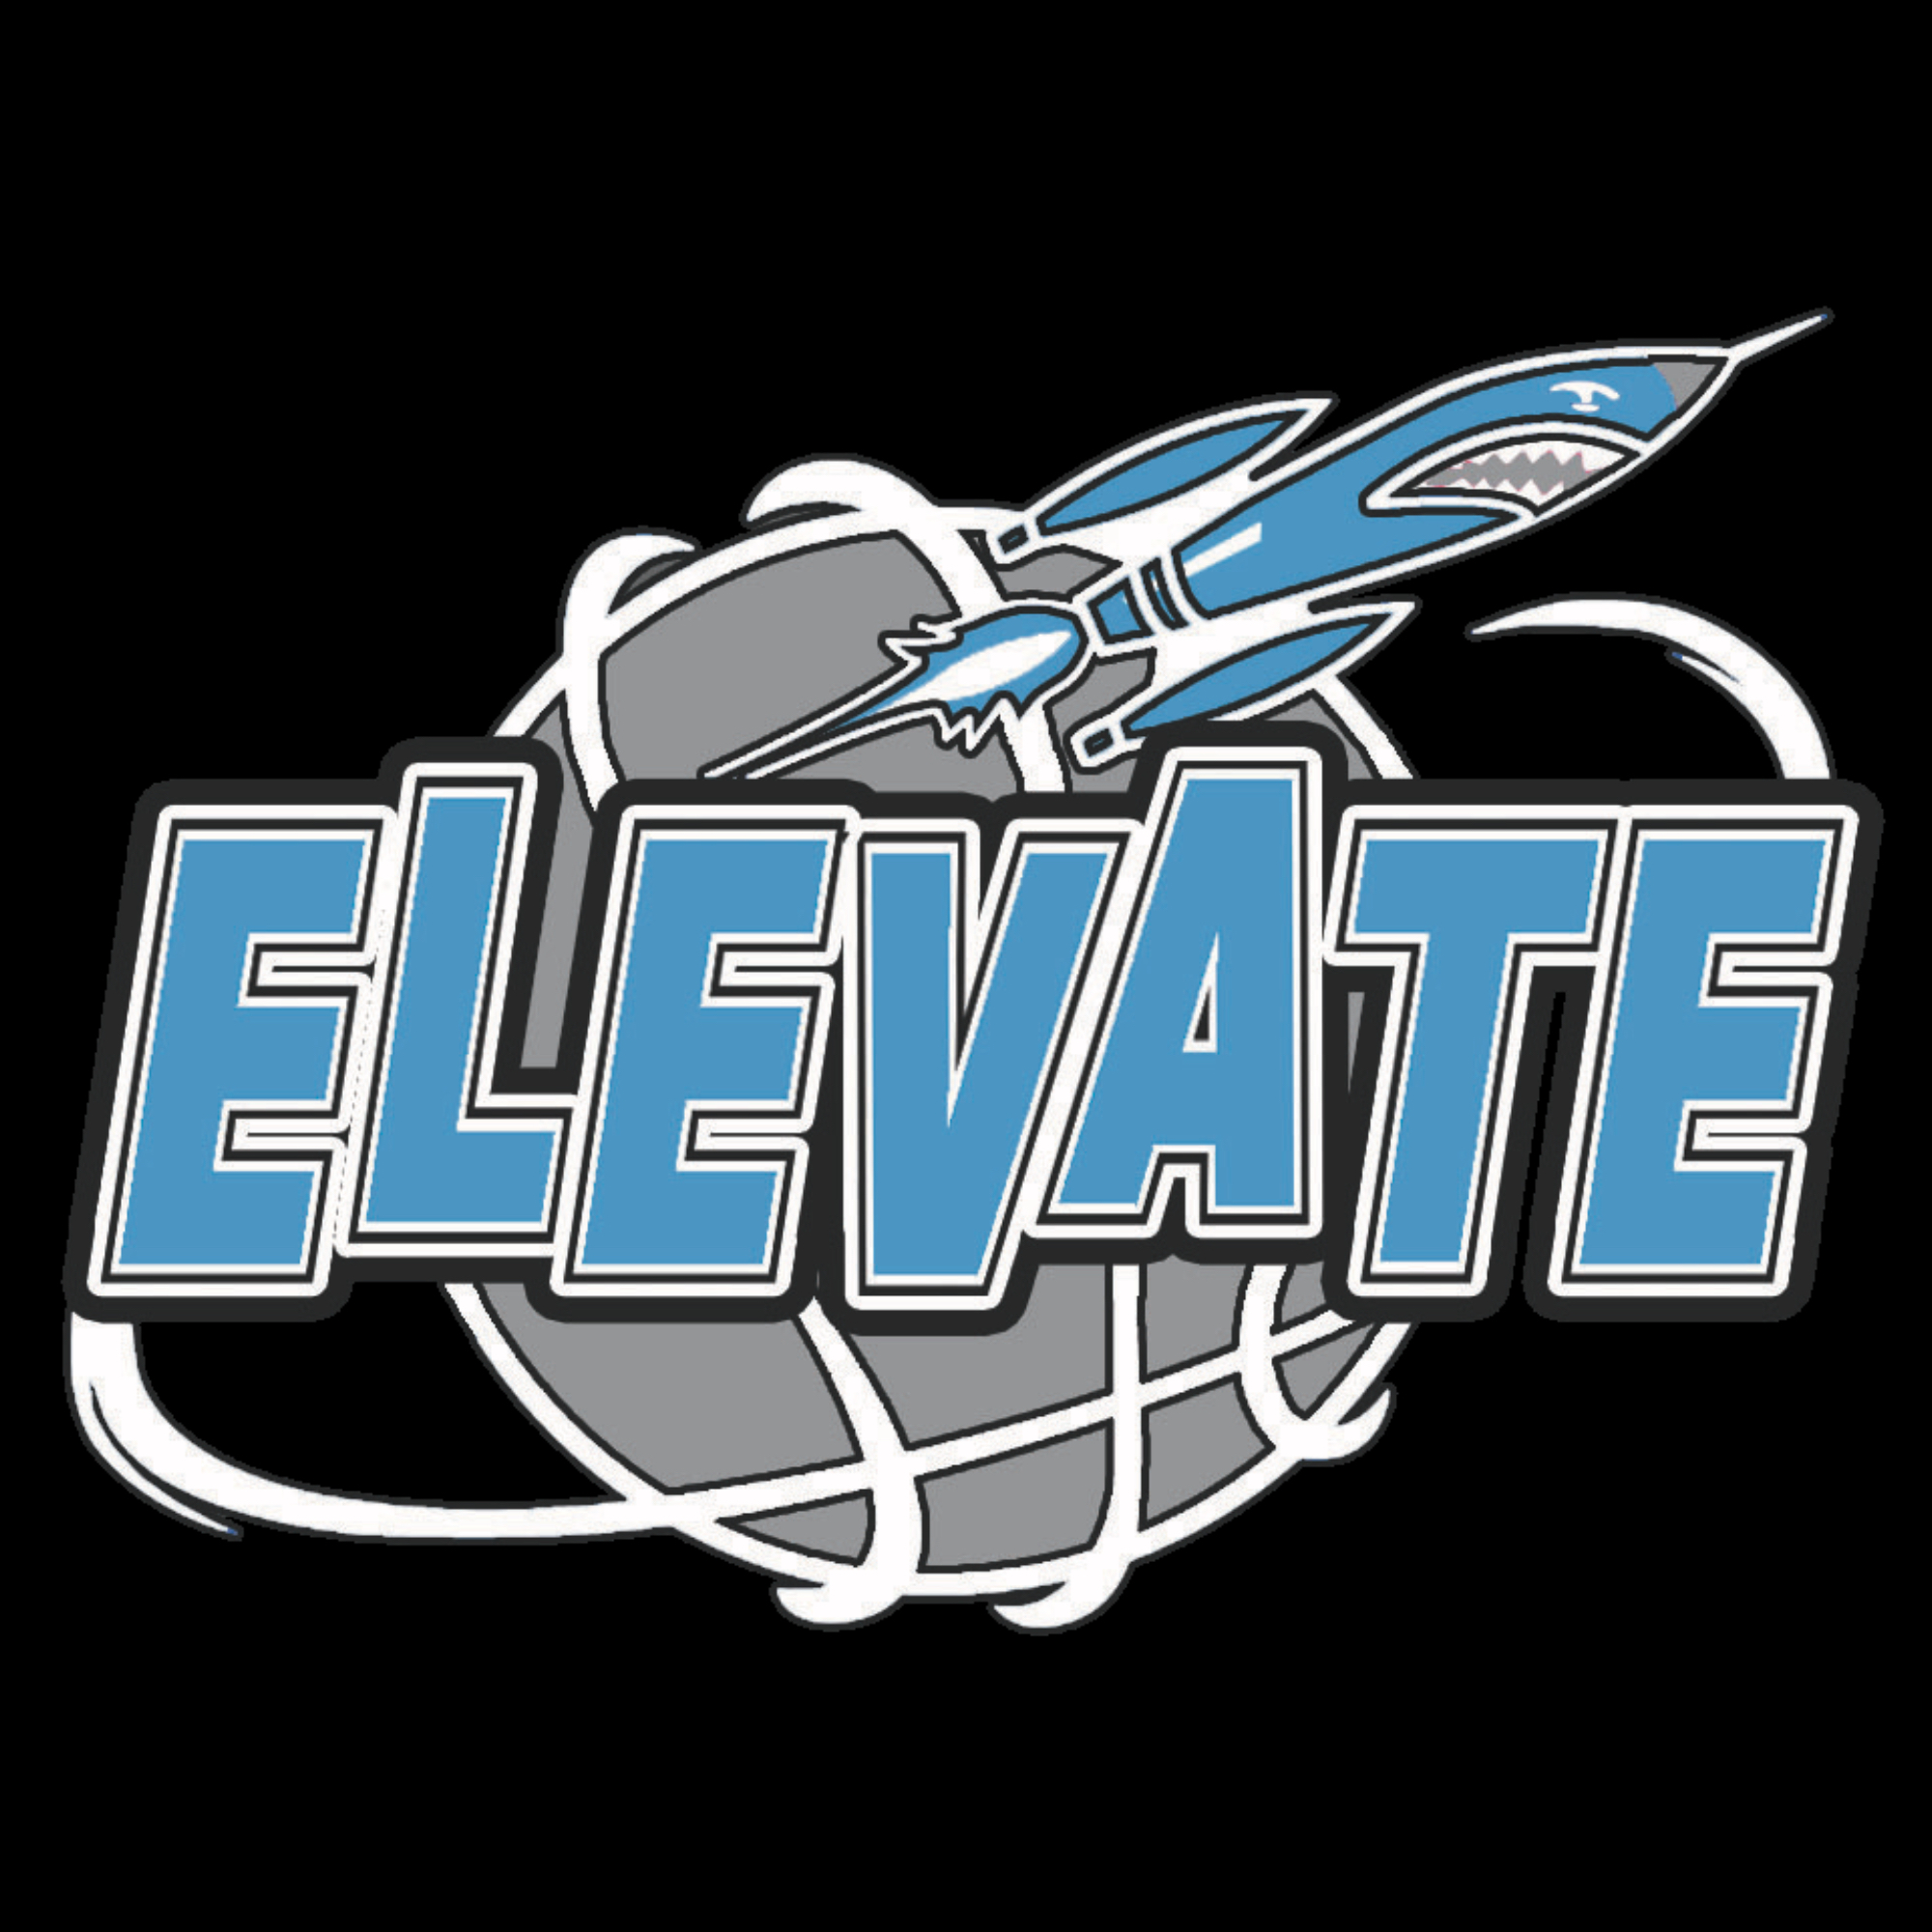 The official logo of Team Elevate